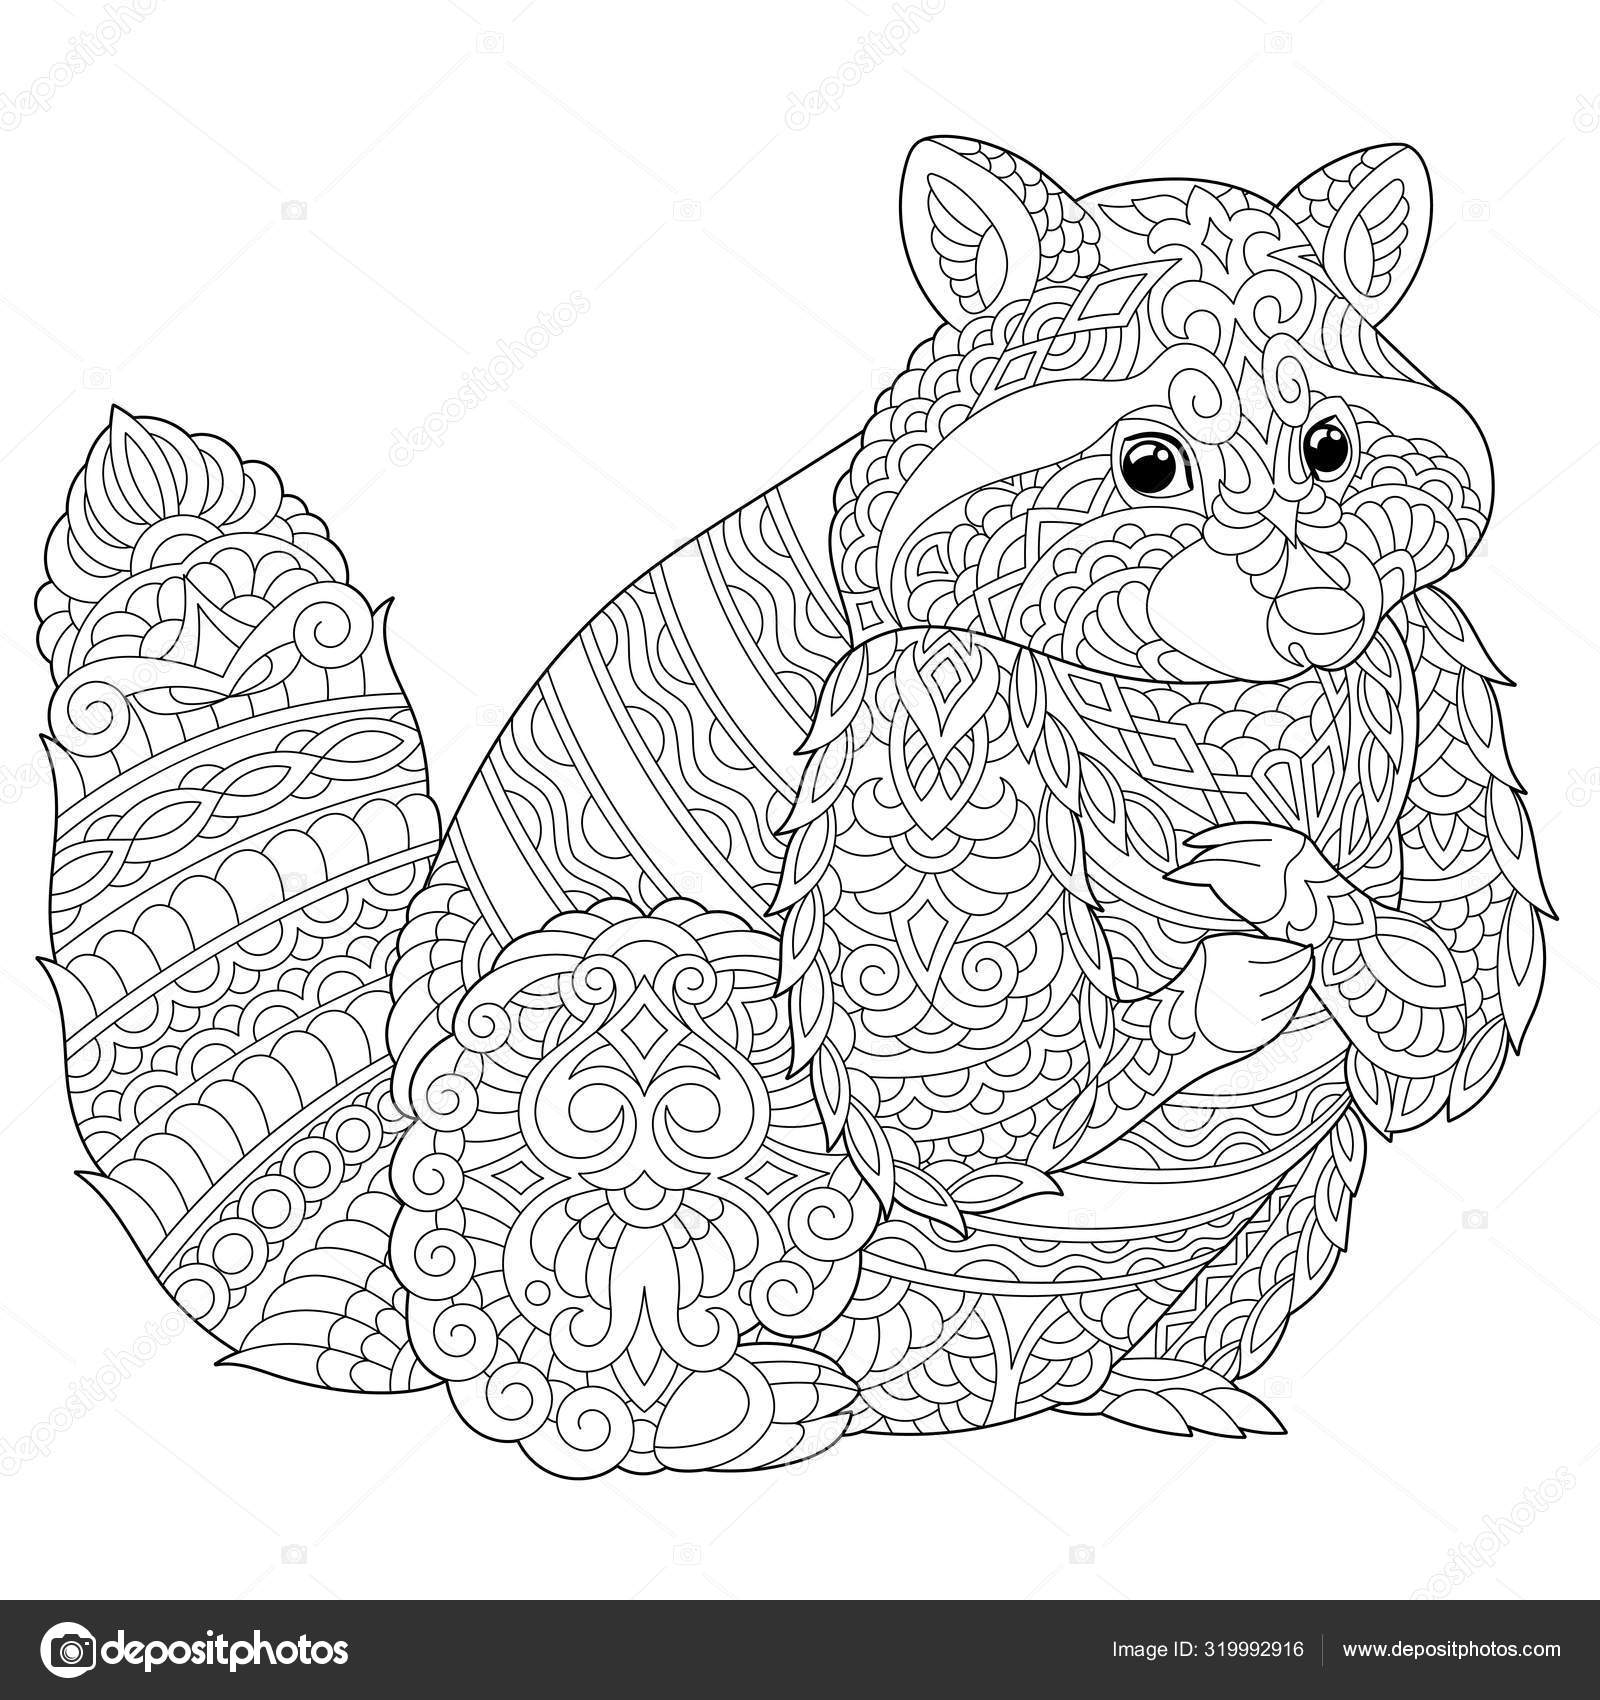 Coloring page with raccoon stock vector by sybirko